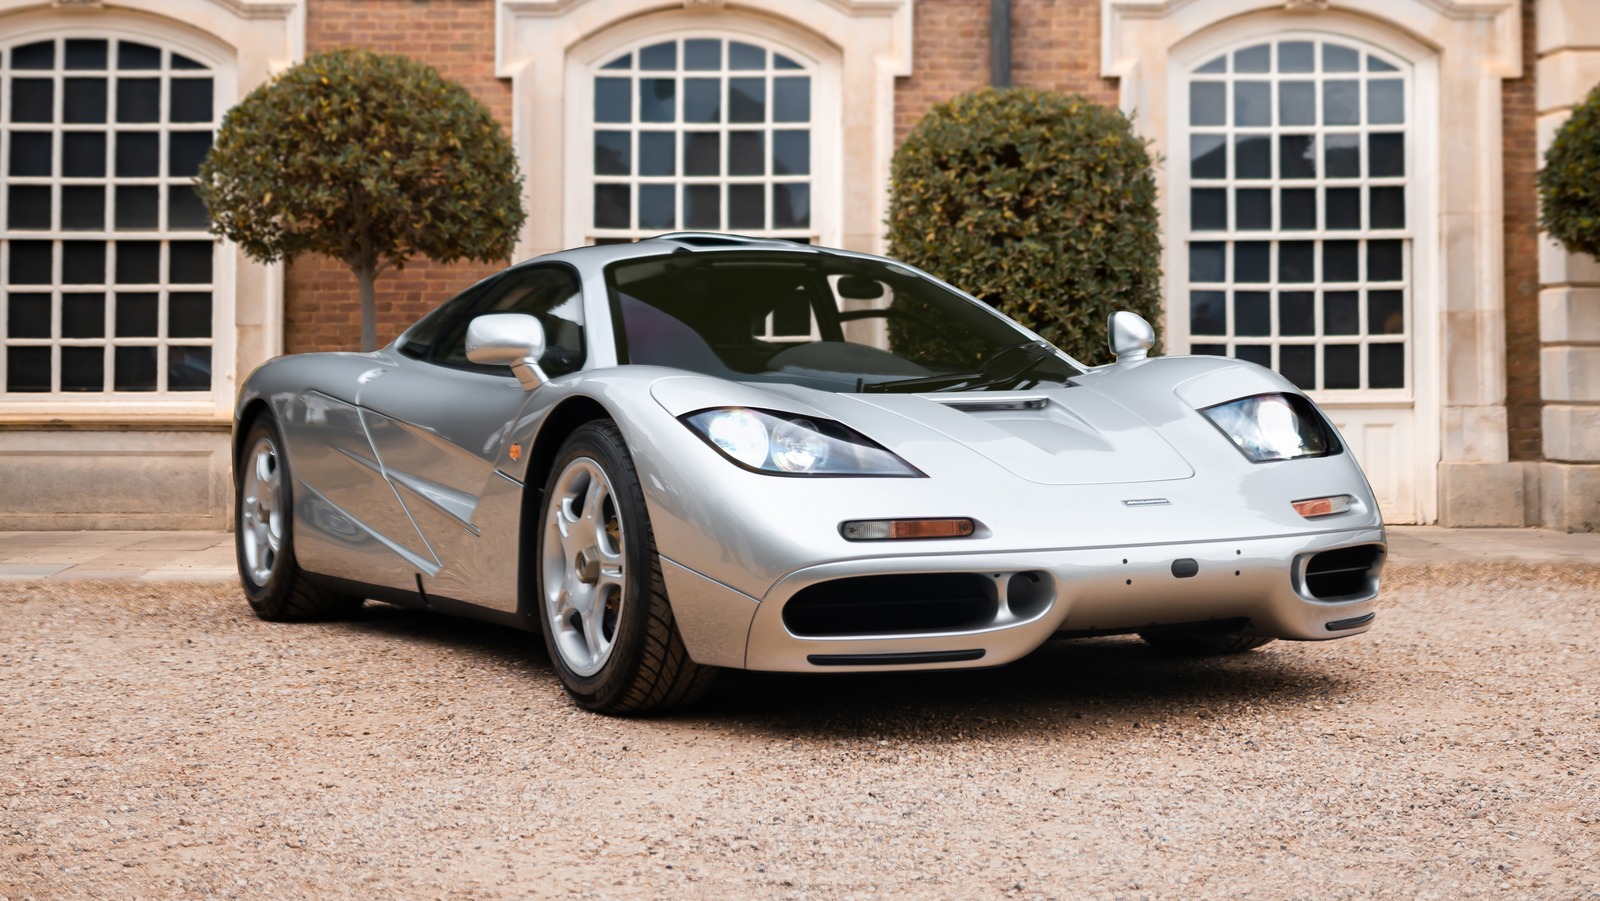 https://www.slashgear.com/img/gallery/why-youll-hardly-find-any-mclaren-f1s-on-the-road/l-intro-1655318499.jpg